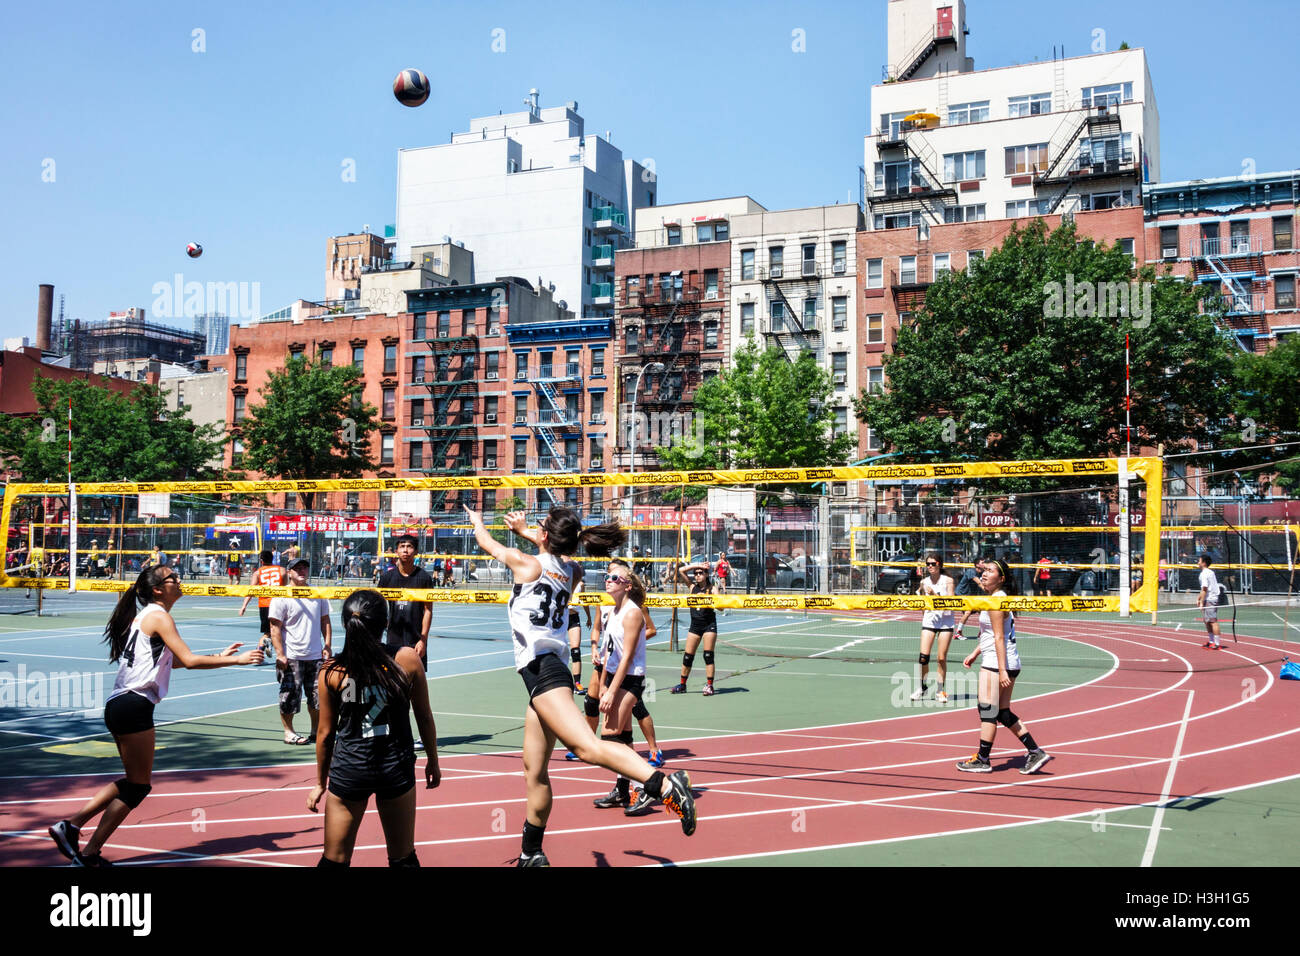 New York City,NY NYC Lower Manhattan,Chinatown,Seward Park,public park,athletic field,recreational sports,Mini Volleyball Tournament,volleyball,court, Stock Photo